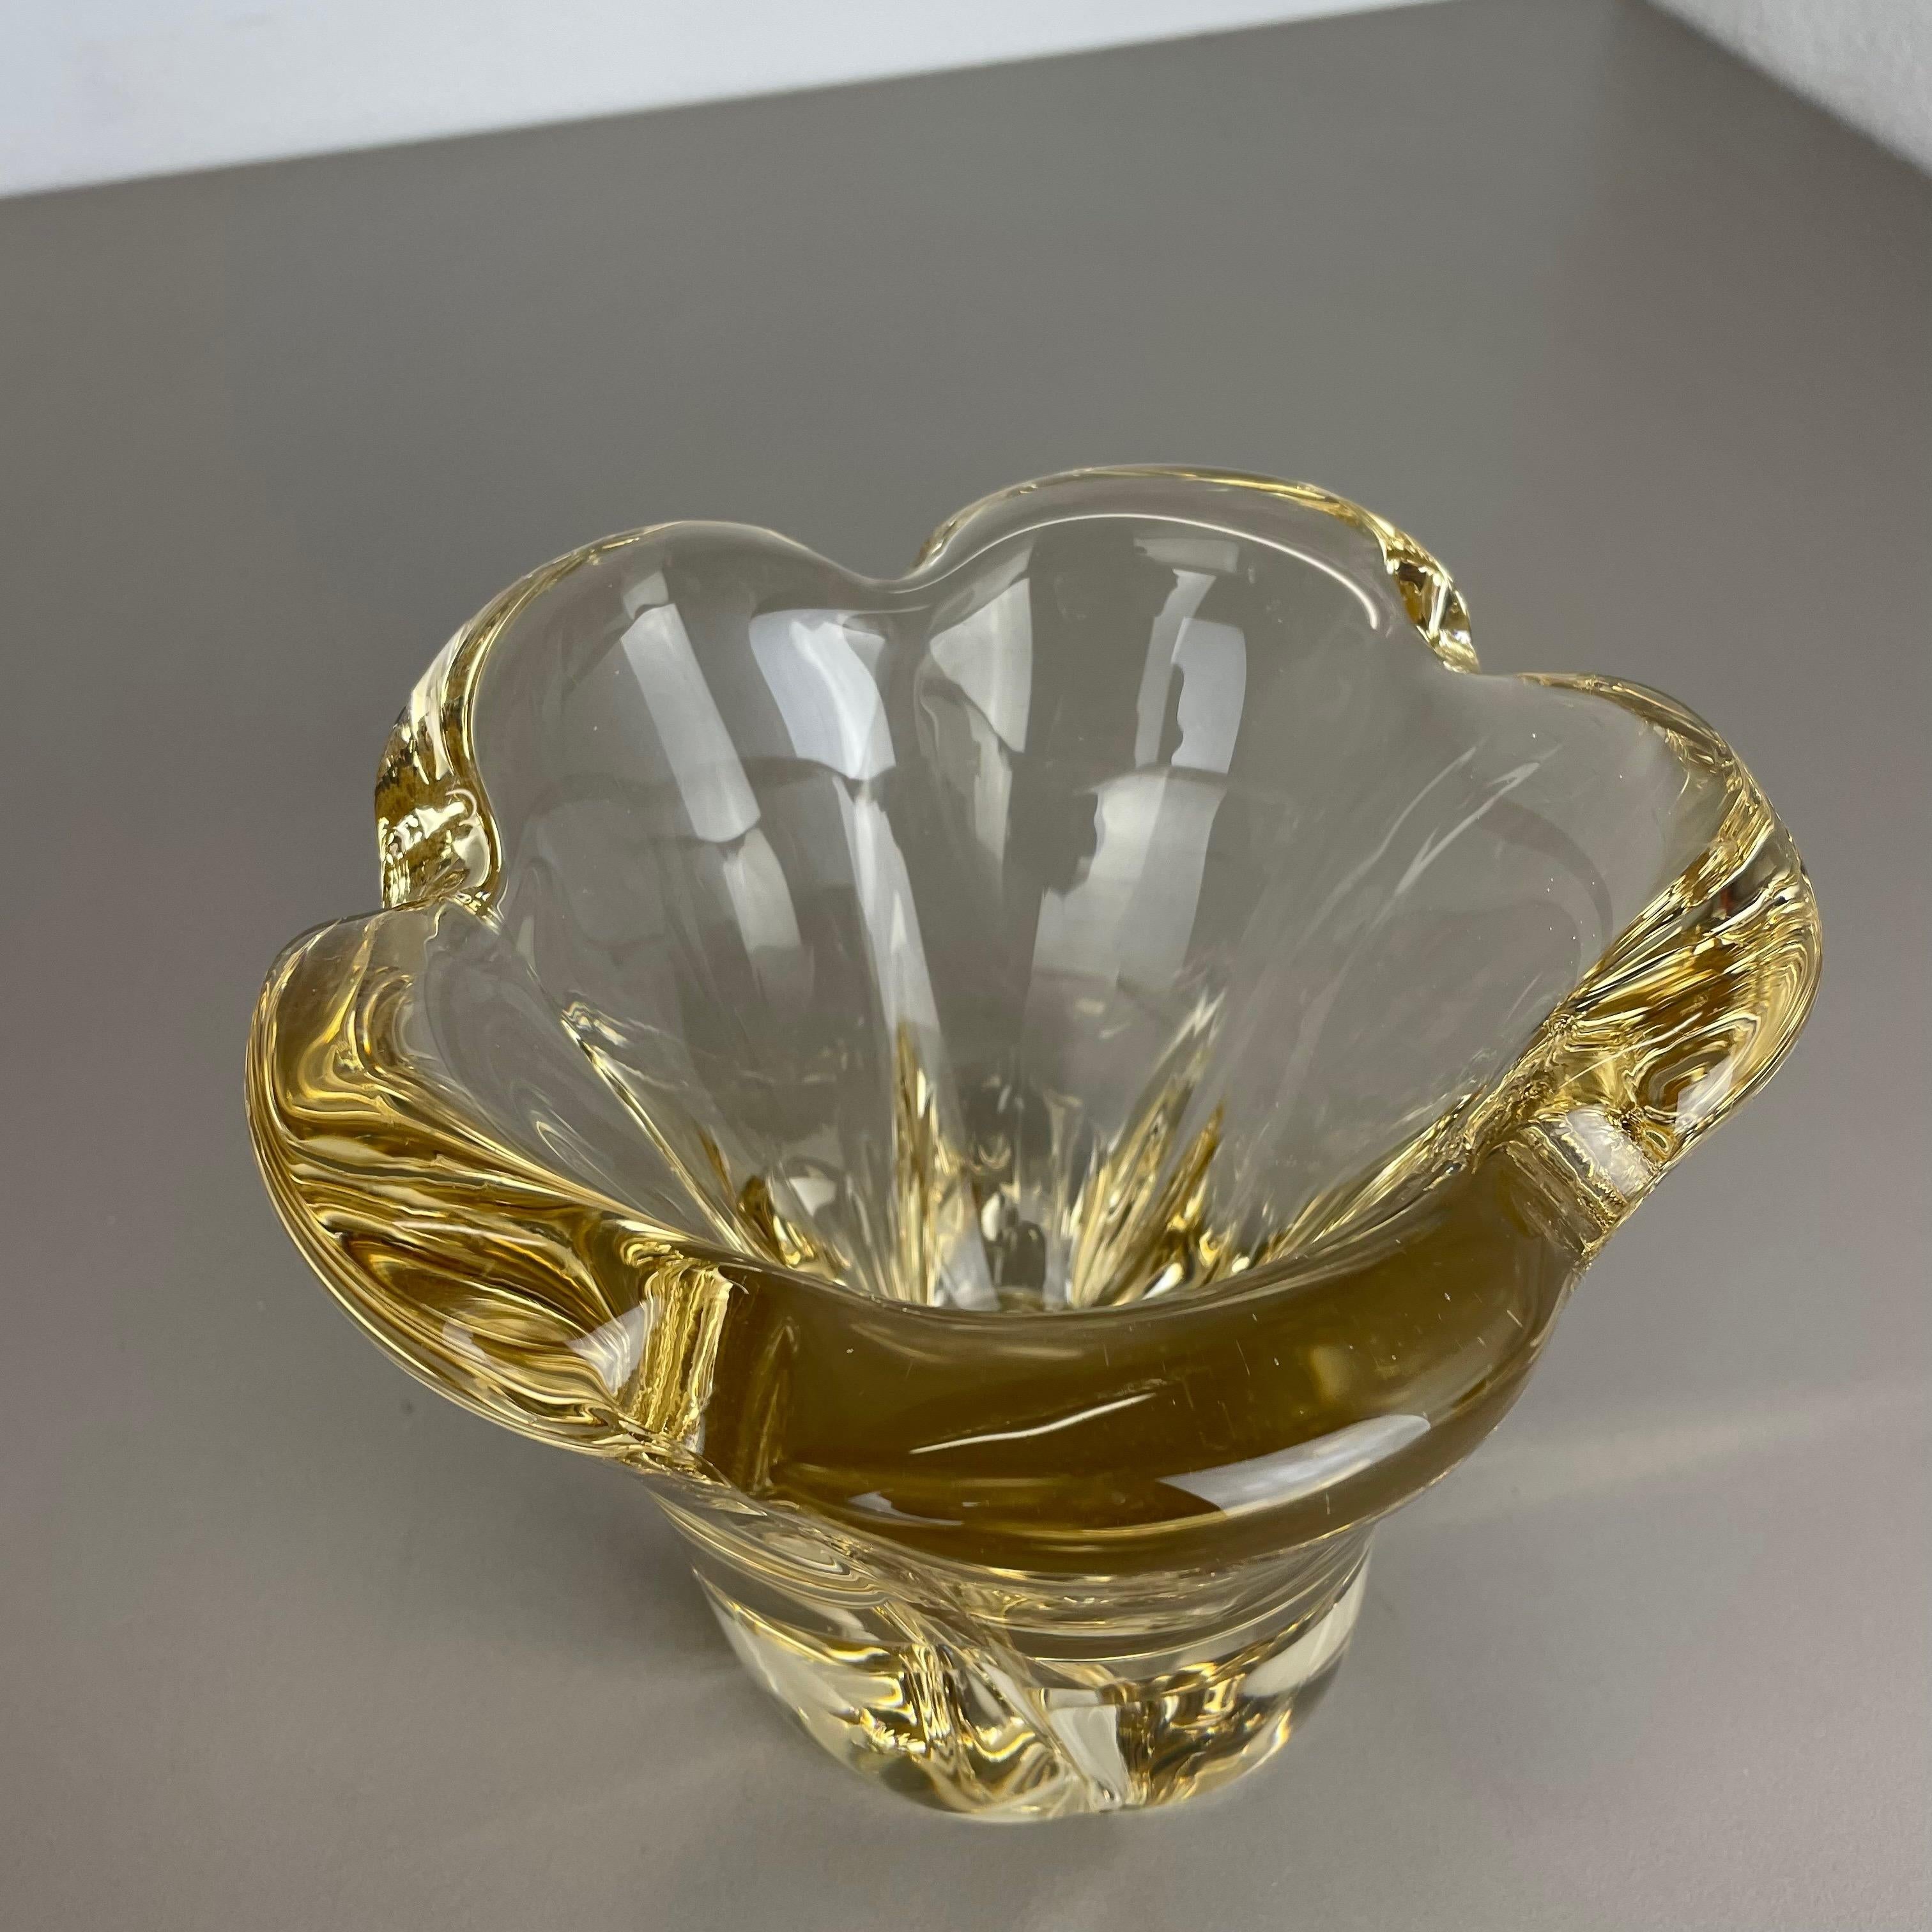 Large 3kg Crystal Glass Centerpiece Shell Bowl by DAUM Nancy, France, 1970s For Sale 2